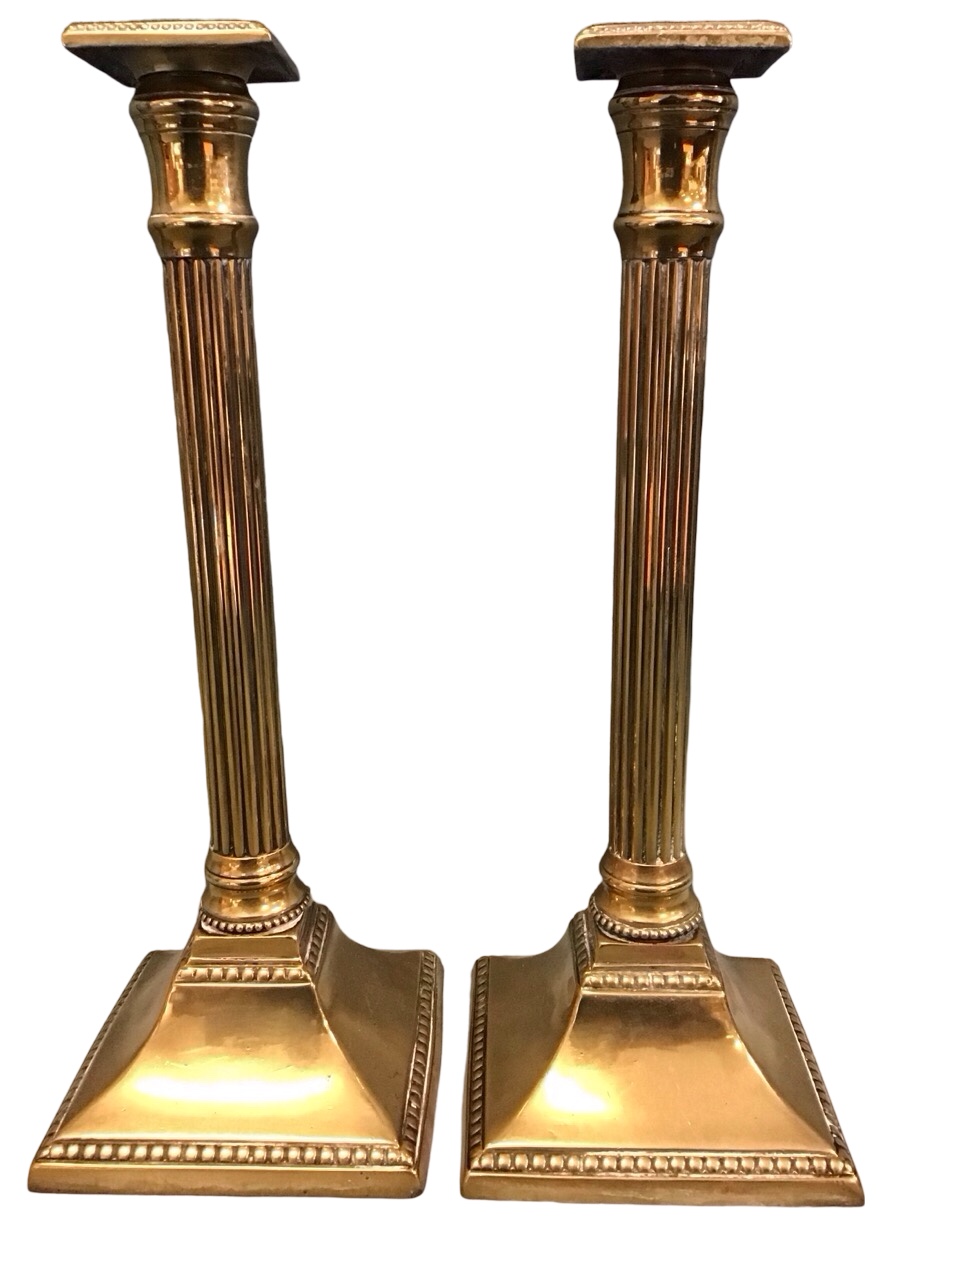 A pair of Georgian brass candlesticks with square beaded sconces above reeded Tuscan columns on